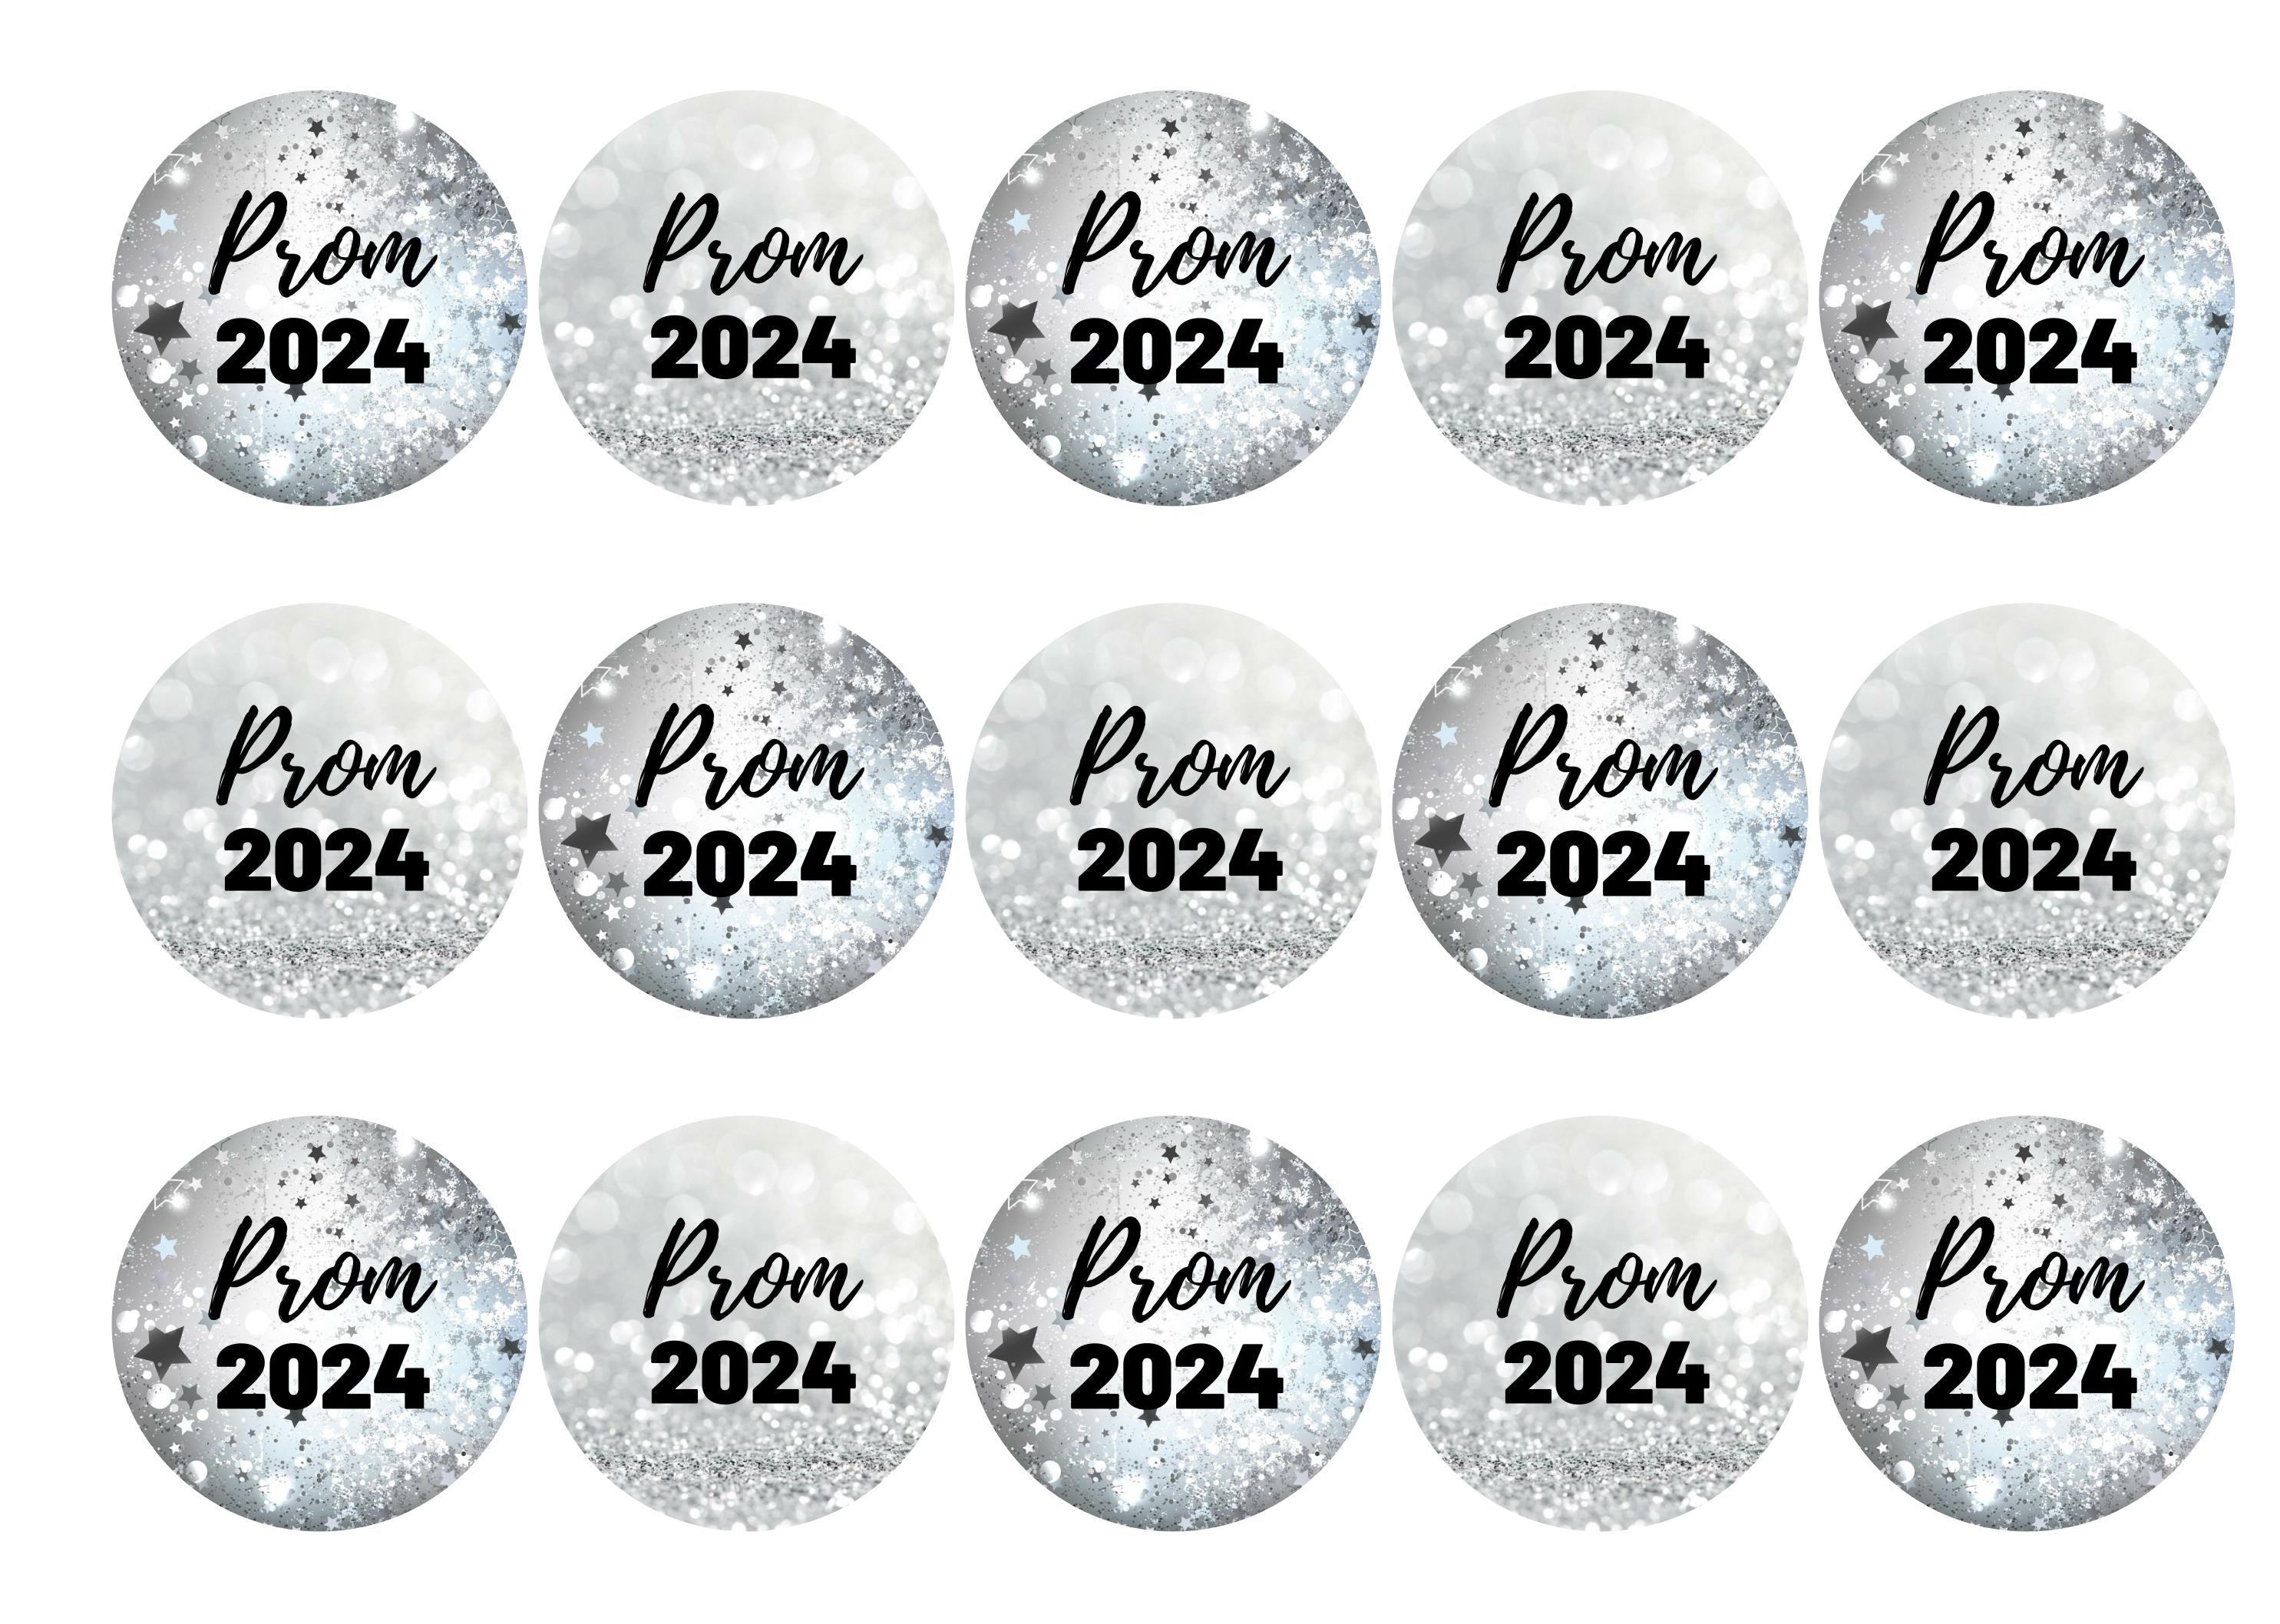 Prom 2024 silver sparkle themed cupcake toppers